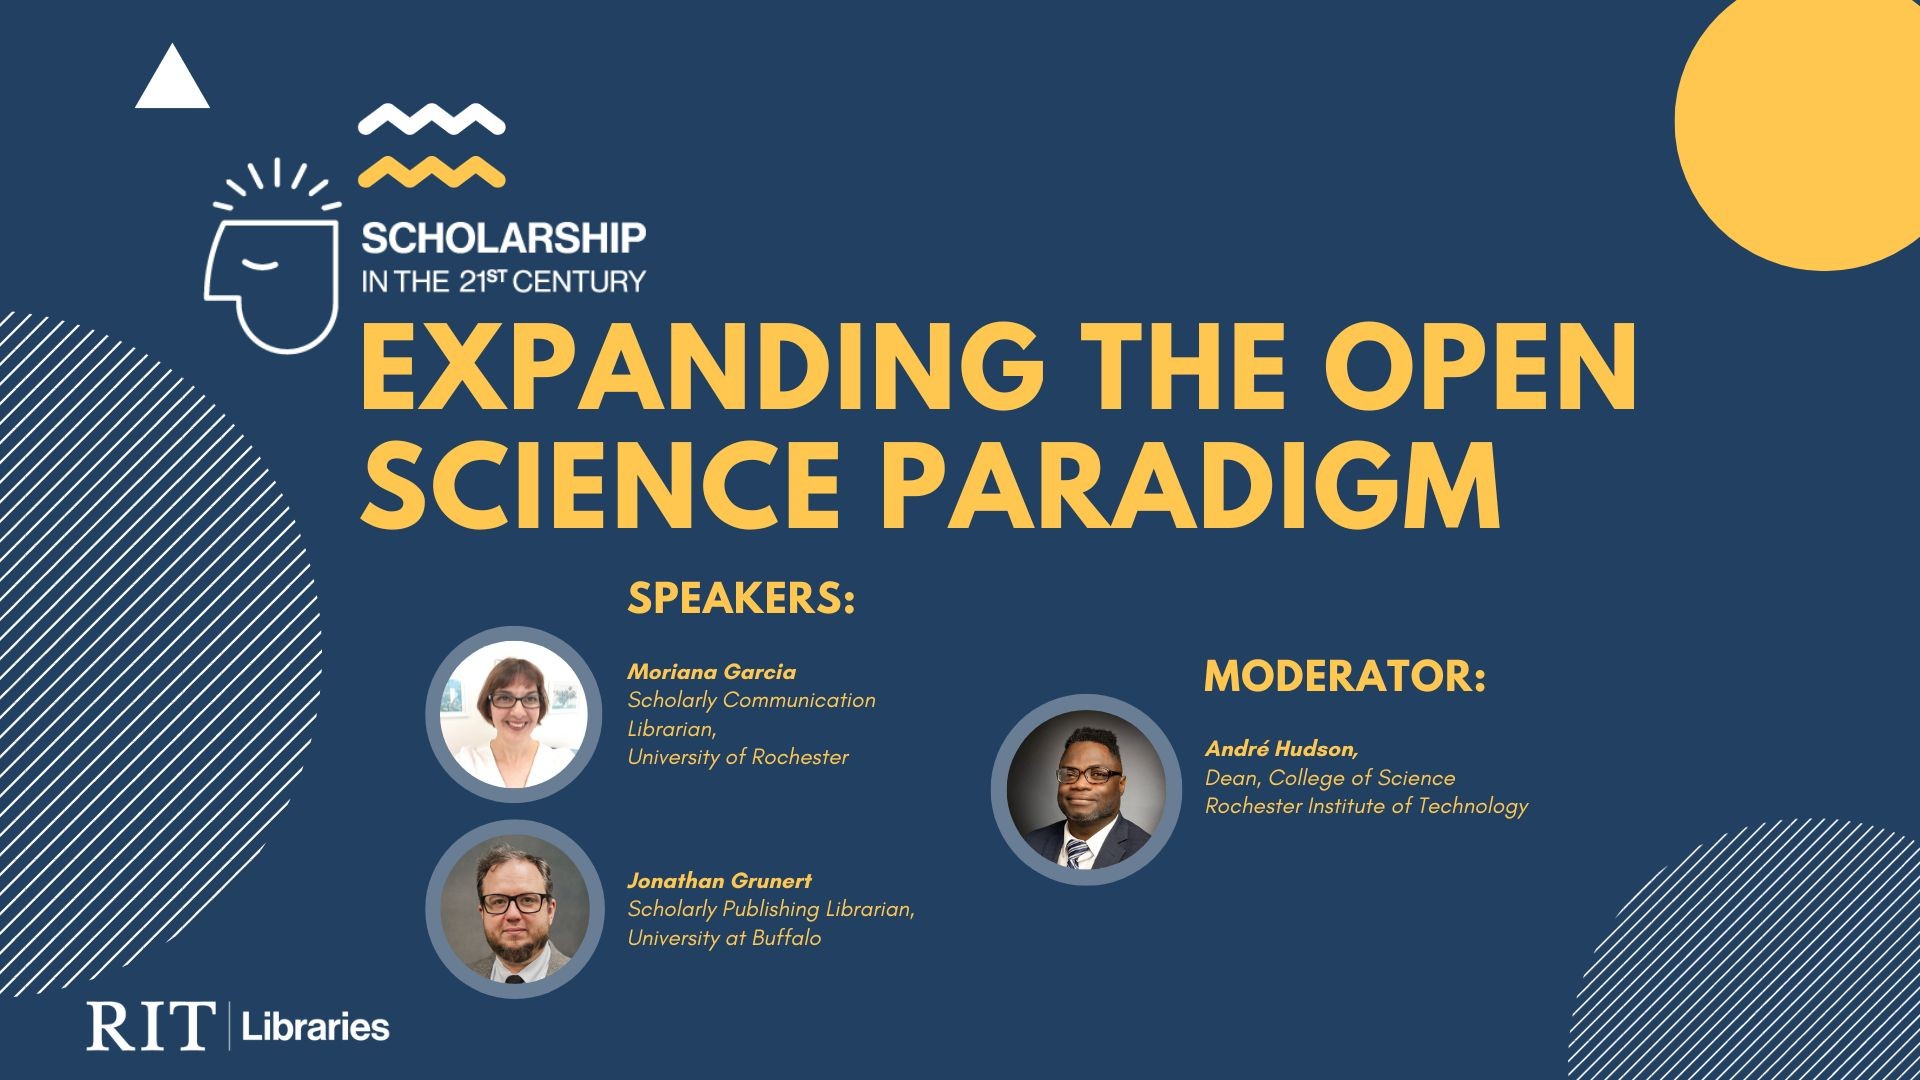 Banner image of event that states: Scholarship in the 21st Century: Expanding the Open Science Paradigm